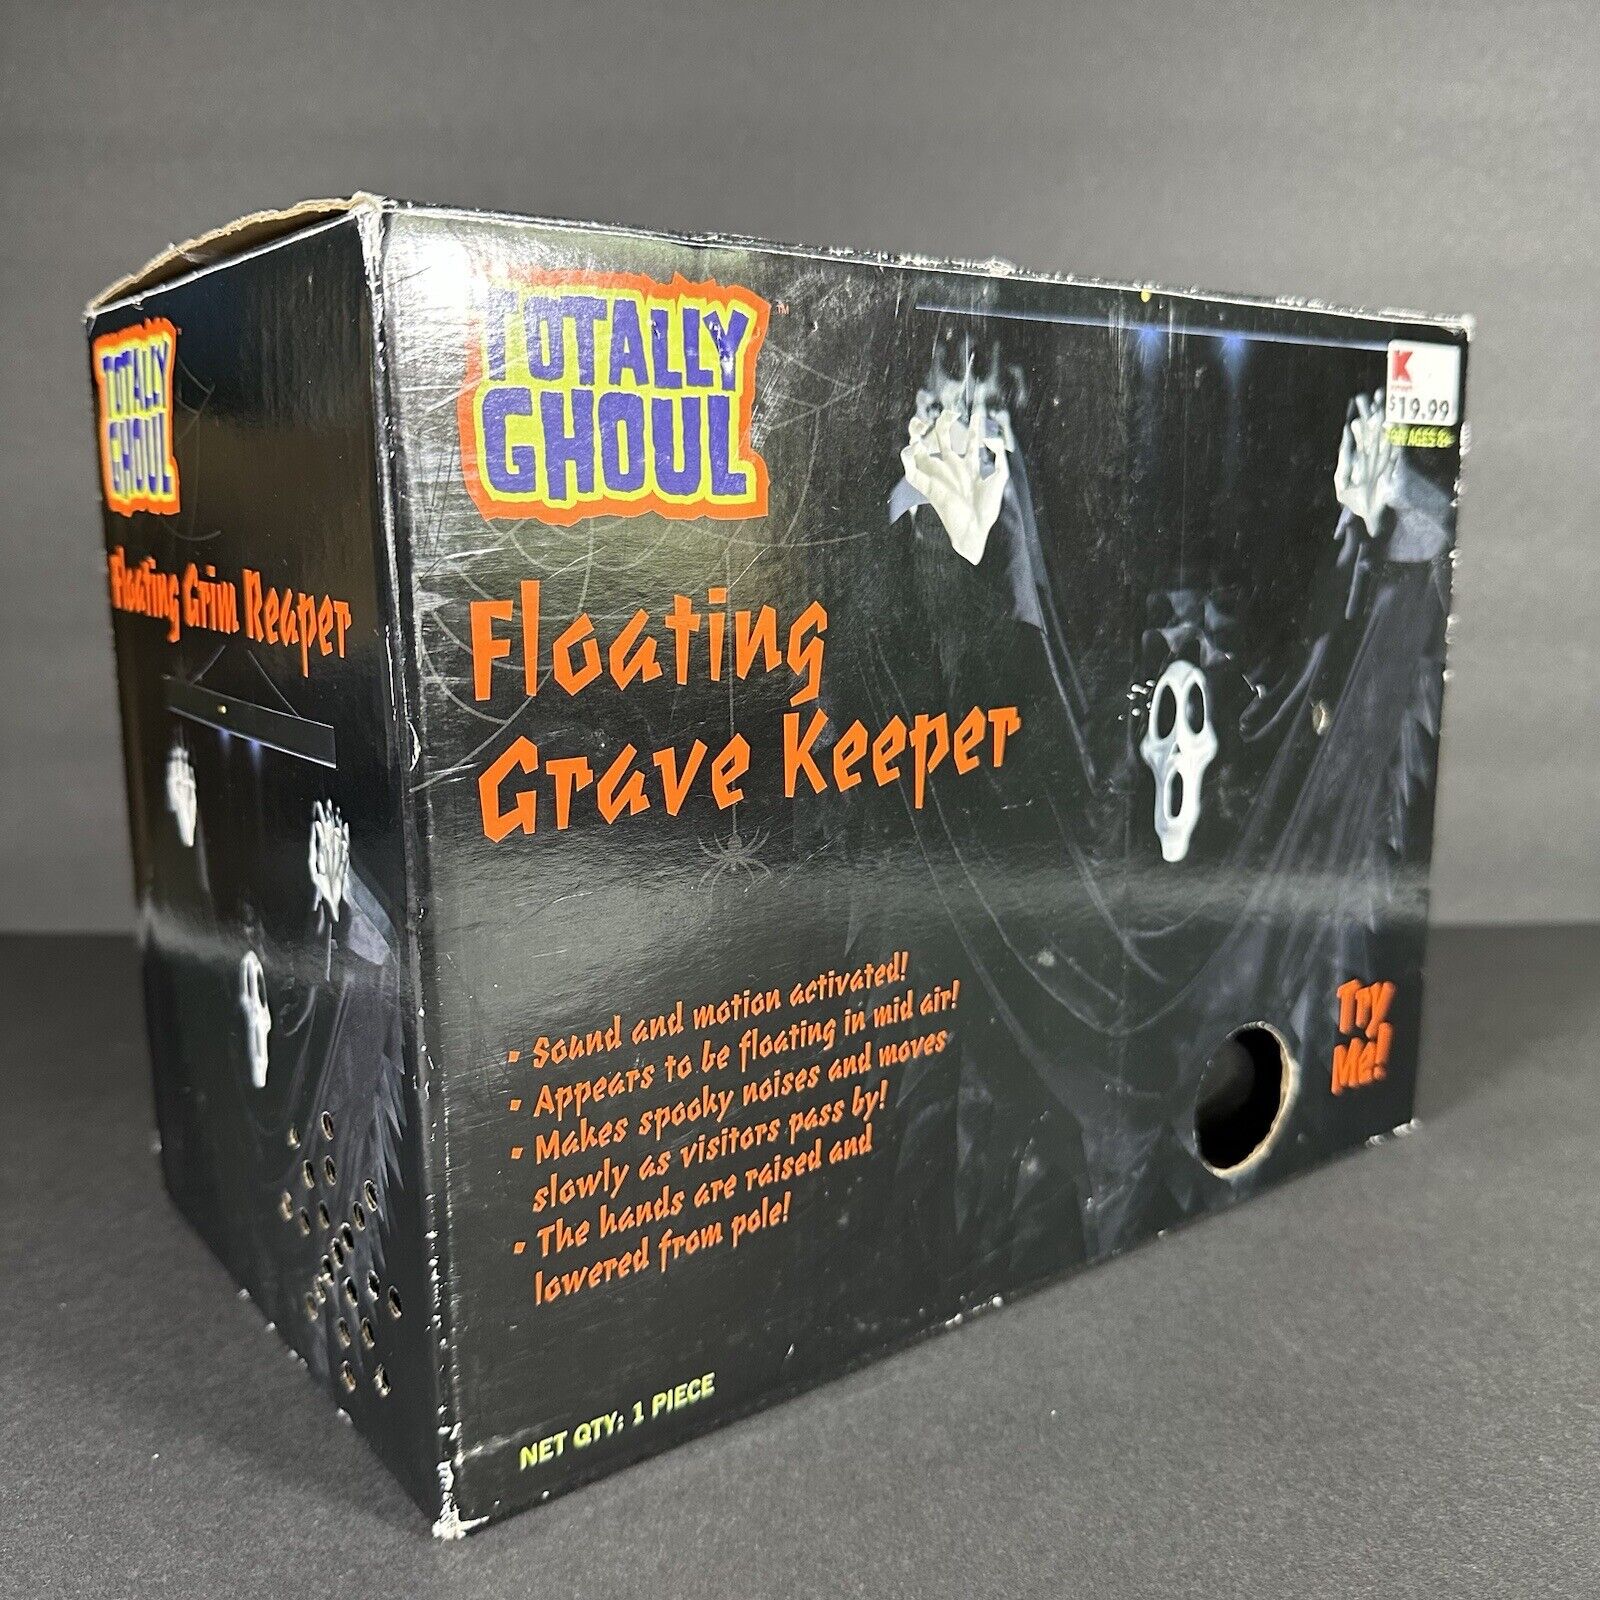 TOTALLY GHOUL Floating Grave Keeper Lights & Animated Halloween Prop Open Box